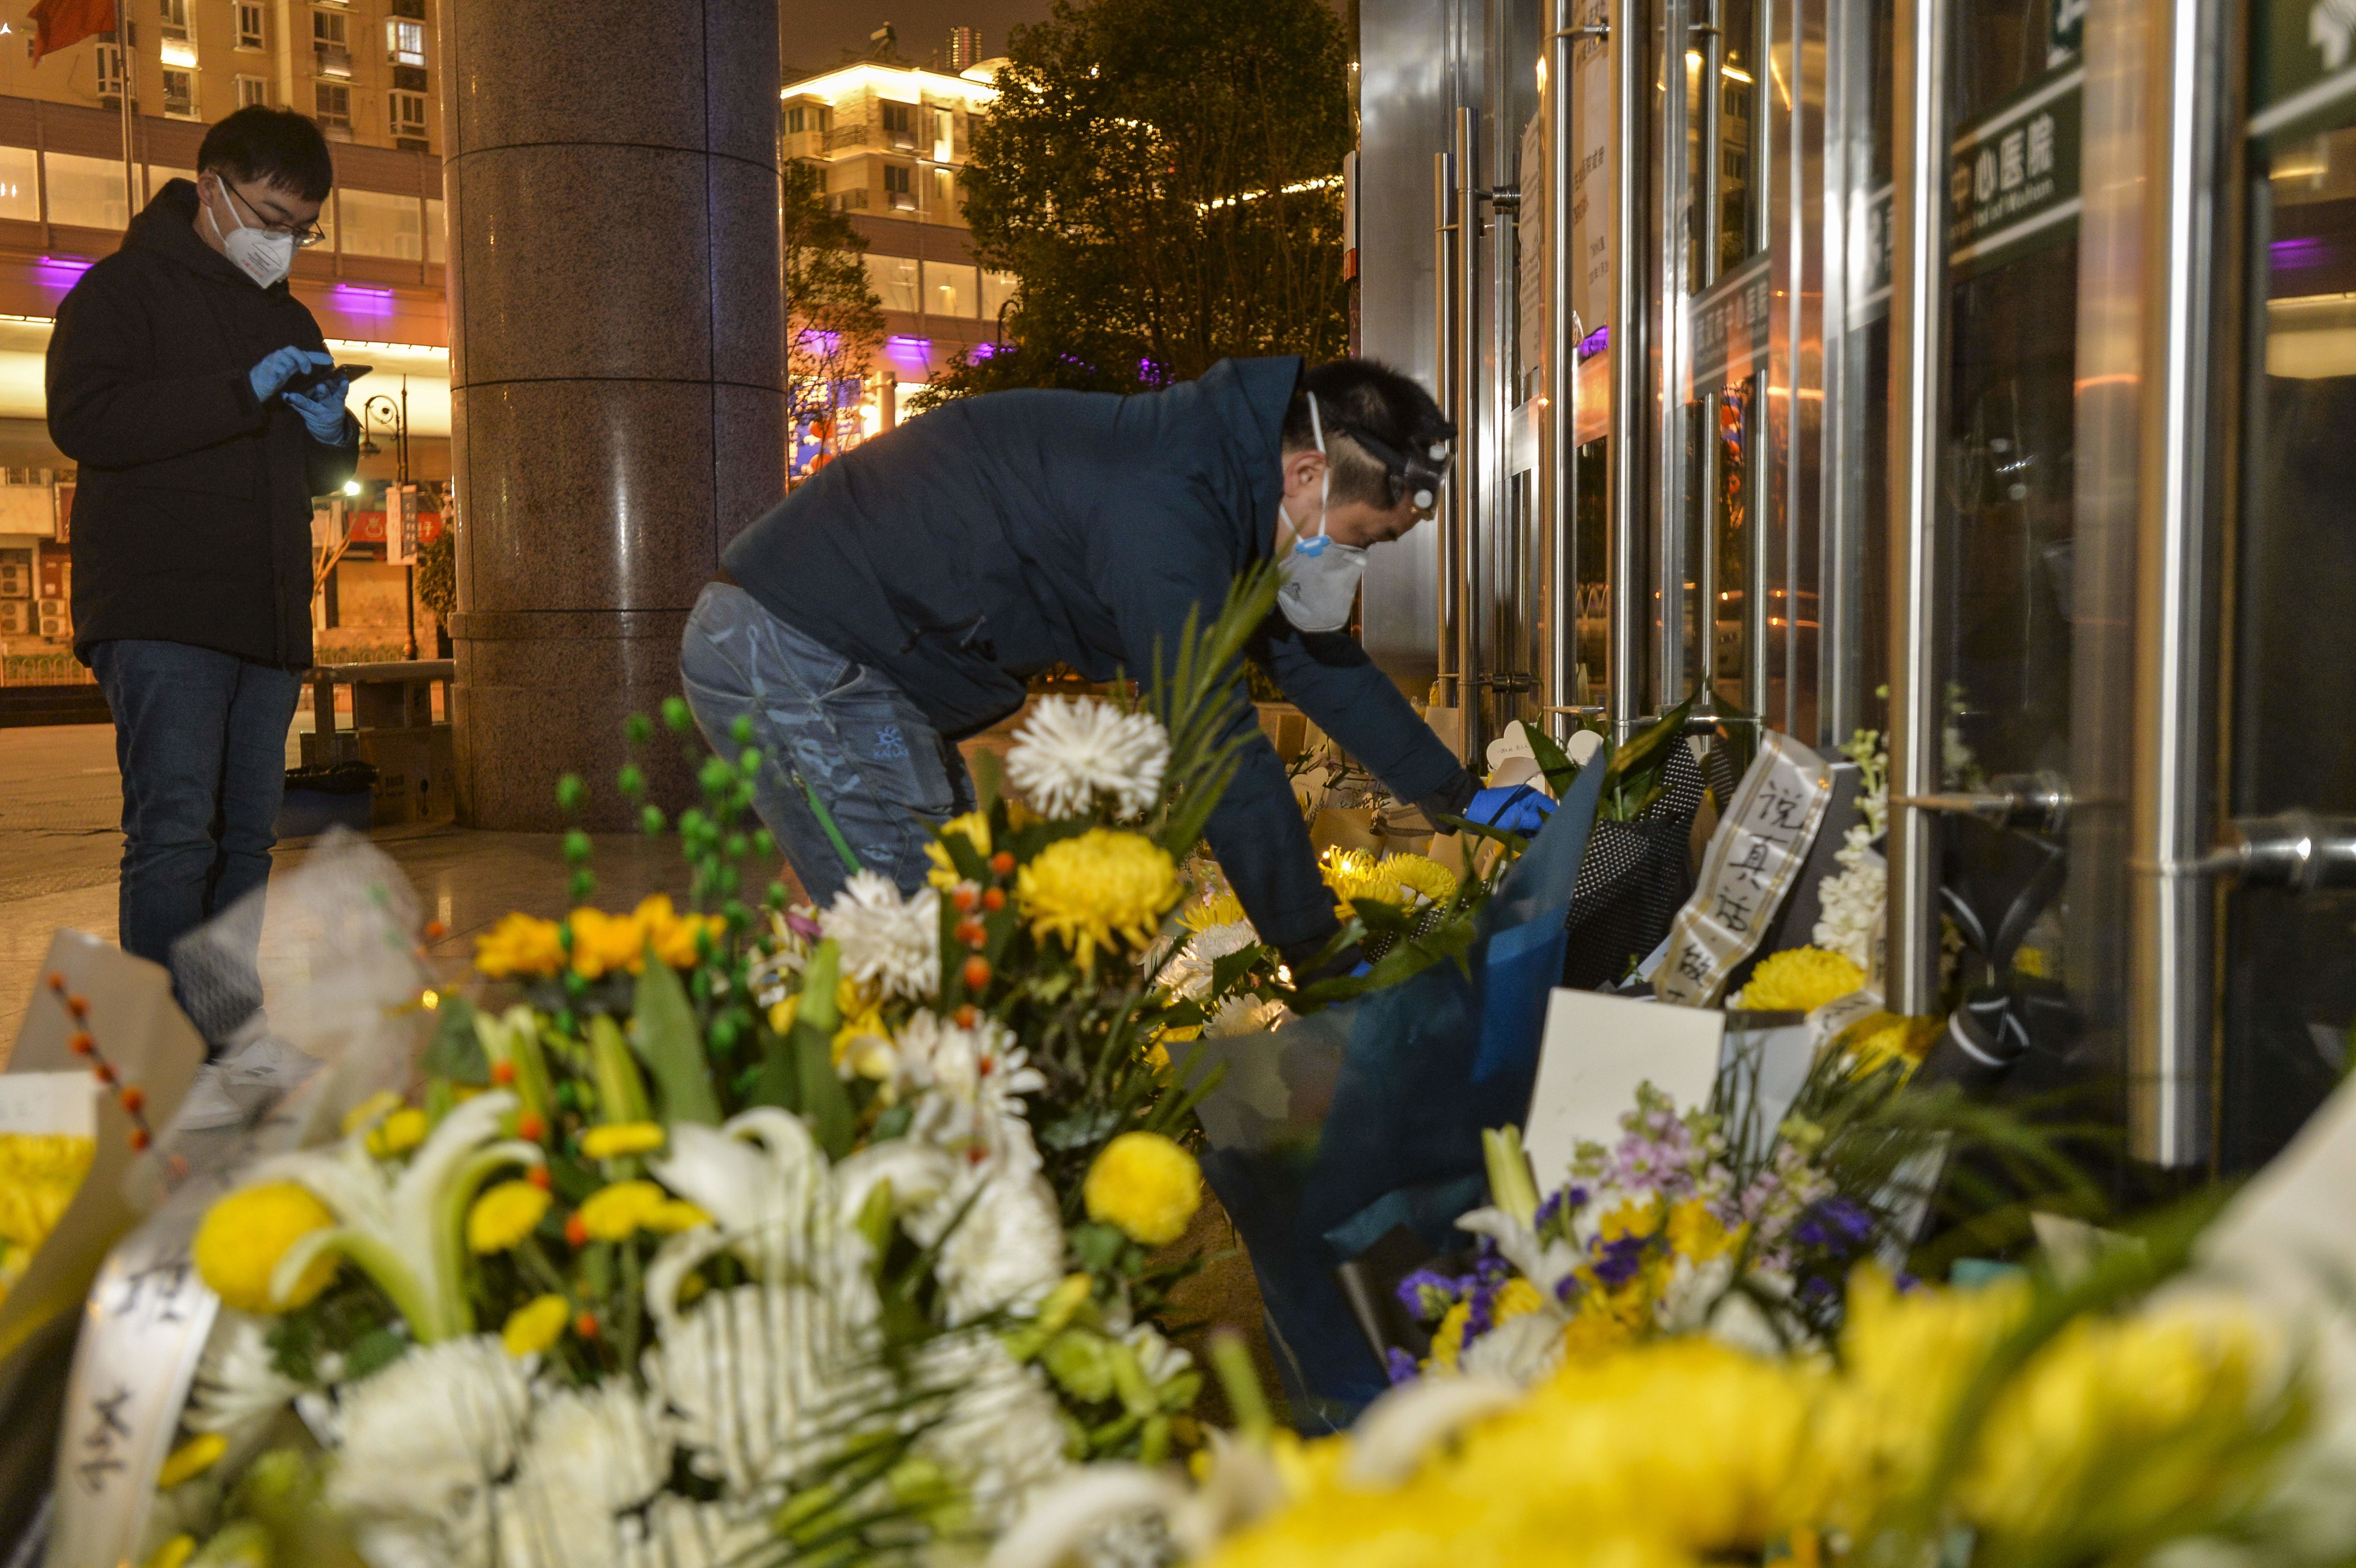 In this image, a person wearing a protective face mask places flowers against the front glass doors of a building